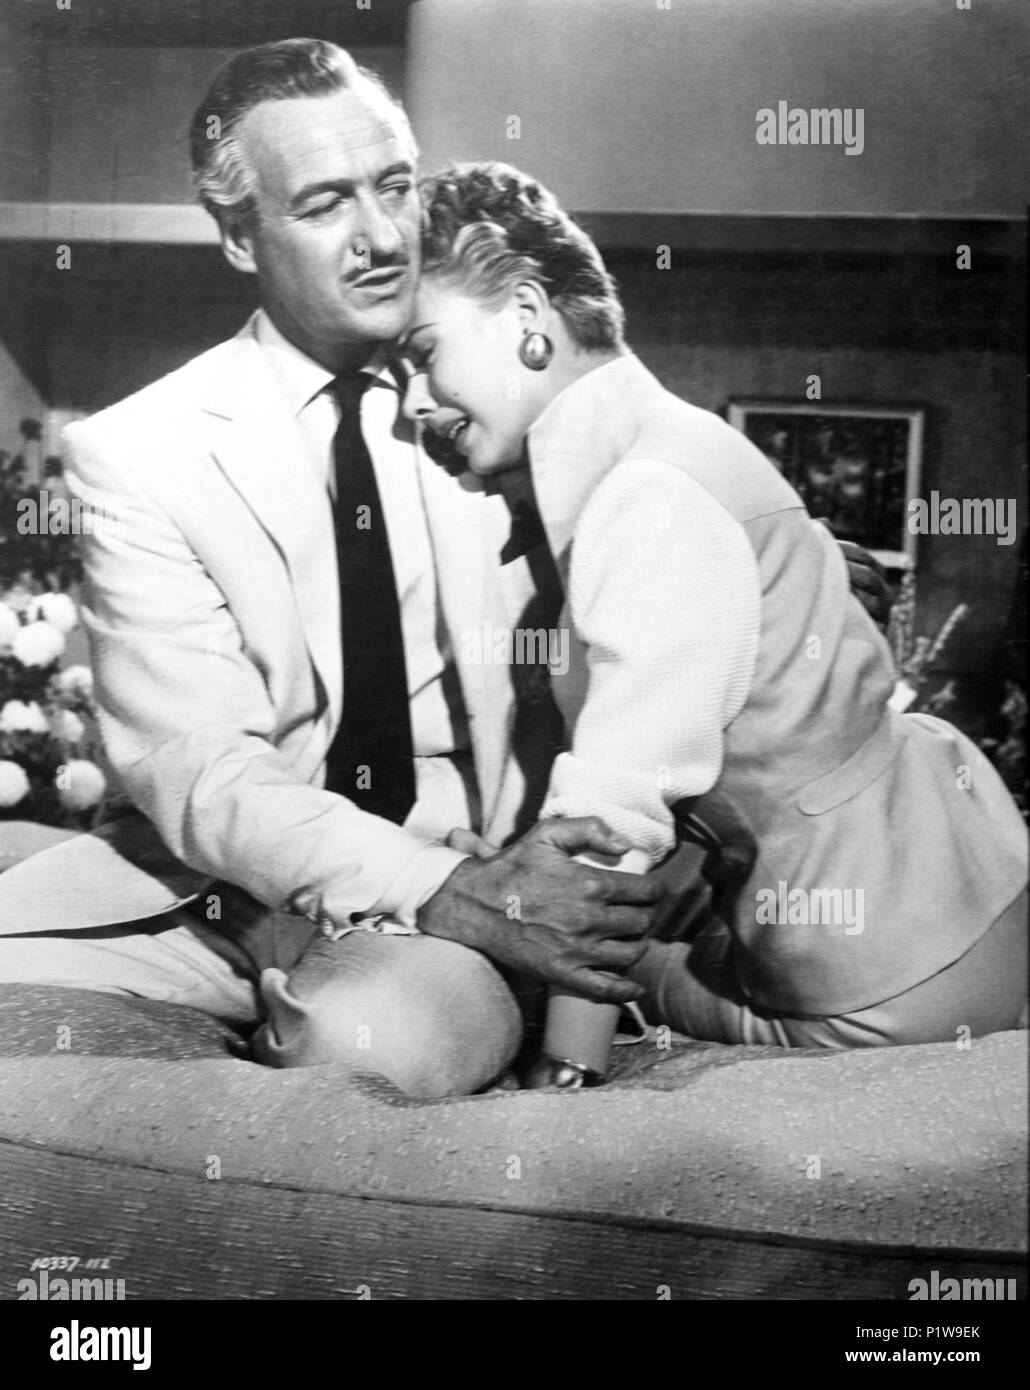 Original Film Title: THE BIRDS AND THE BEES.  English Title: THE BIRDS AND THE BEES.  Film Director: NORMAN TAUROG.  Year: 1956.  Stars: DAVID NIVEN; MITZI GAYNOR. Credit: PARAMOUNT PICTURES / Album Stock Photo